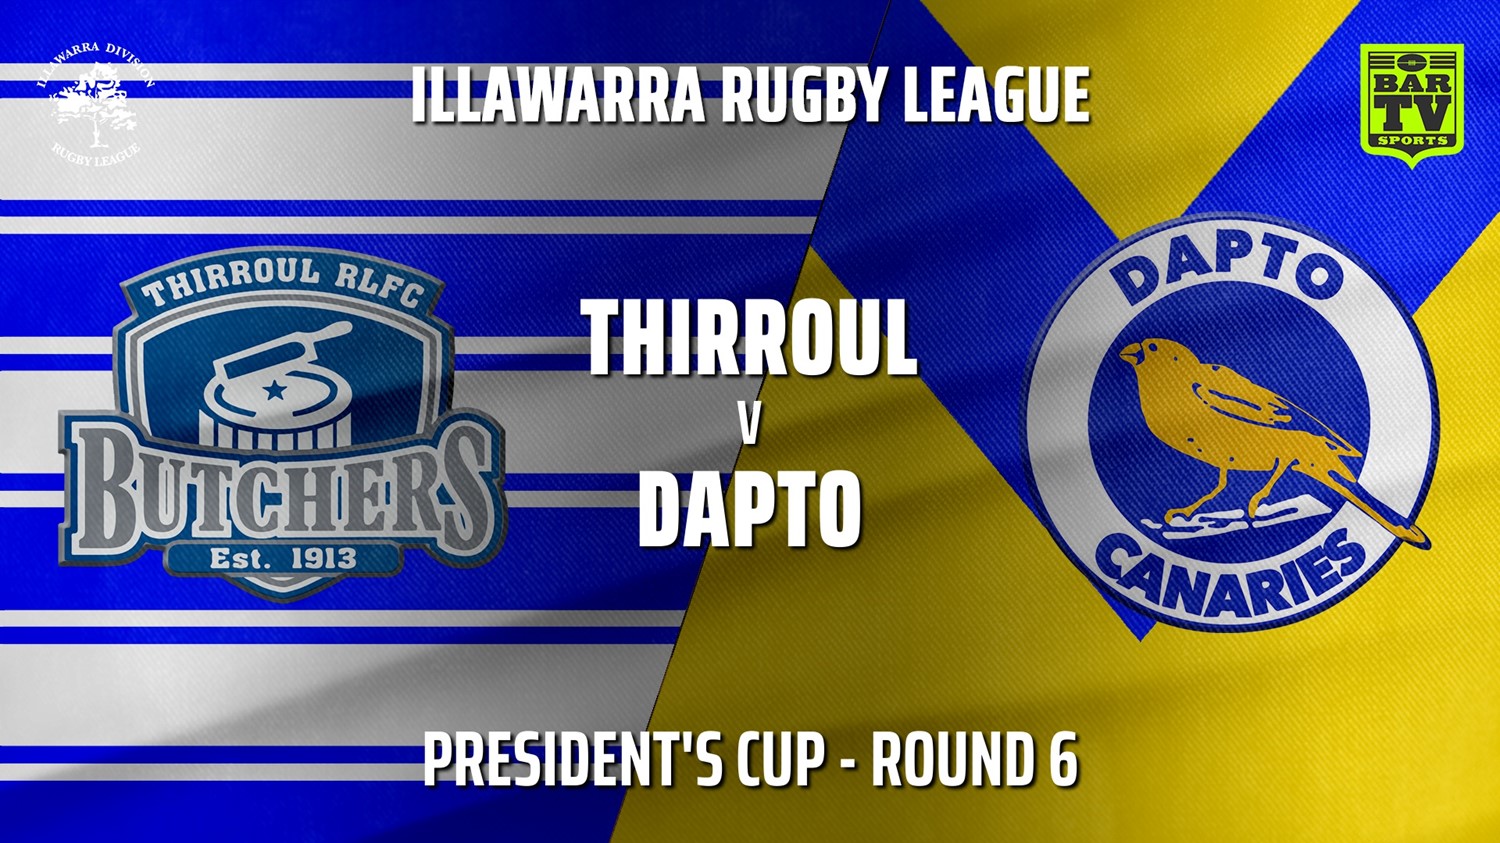 210522-IRL Round 6 - President's Cup - Thirroul Butchers v Dapto Canaries Slate Image